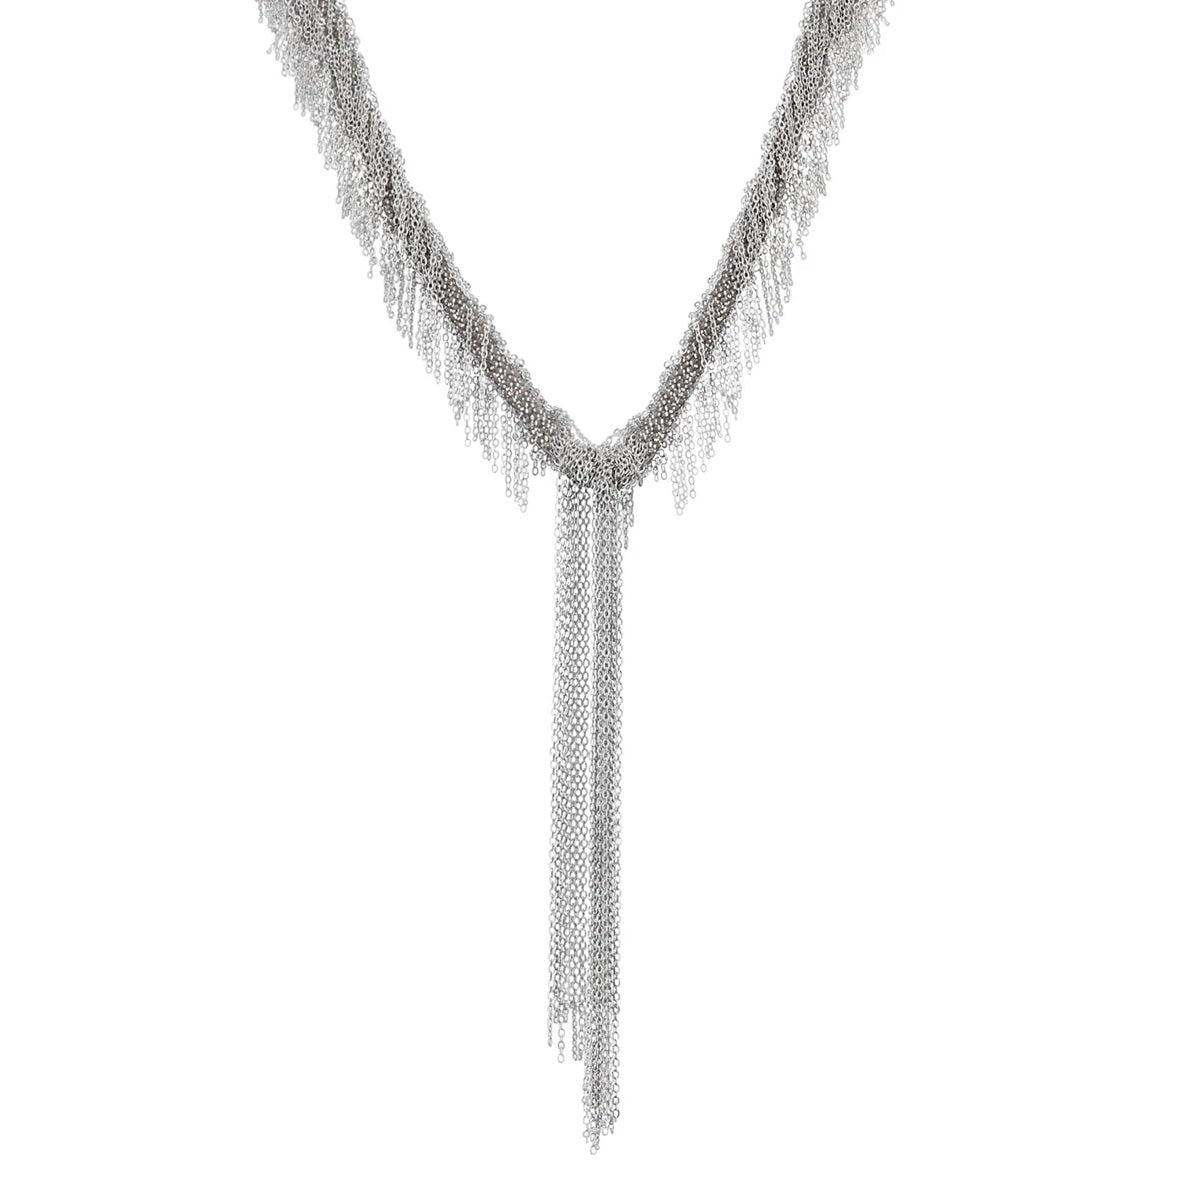 White Bronze & Grey Silk Woven "Fringe" Necklace with Chain Drop - Peridot Fine Jewelry - Marie Laure Chamorel